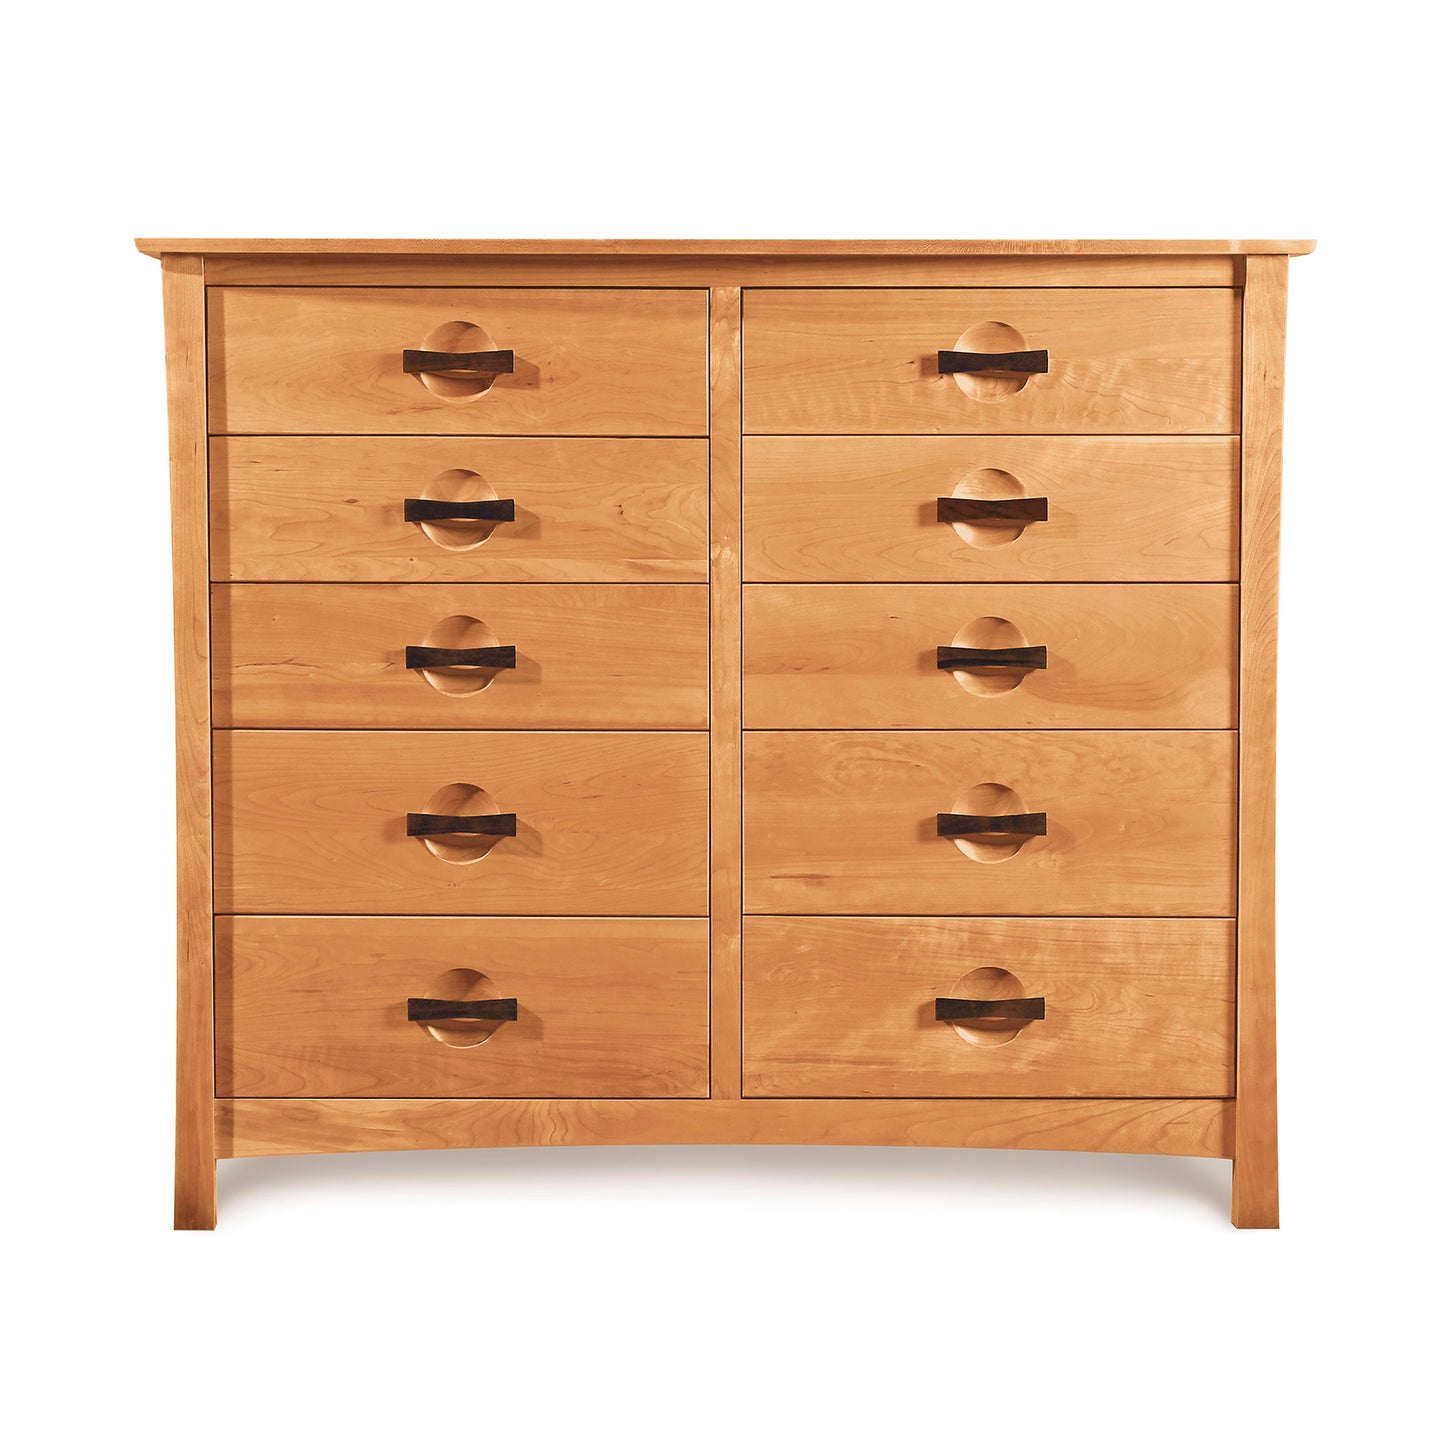 A Copeland Furniture Berkeley 10-Drawer Dresser with six drawers and two cabinet doors on an isolated background.